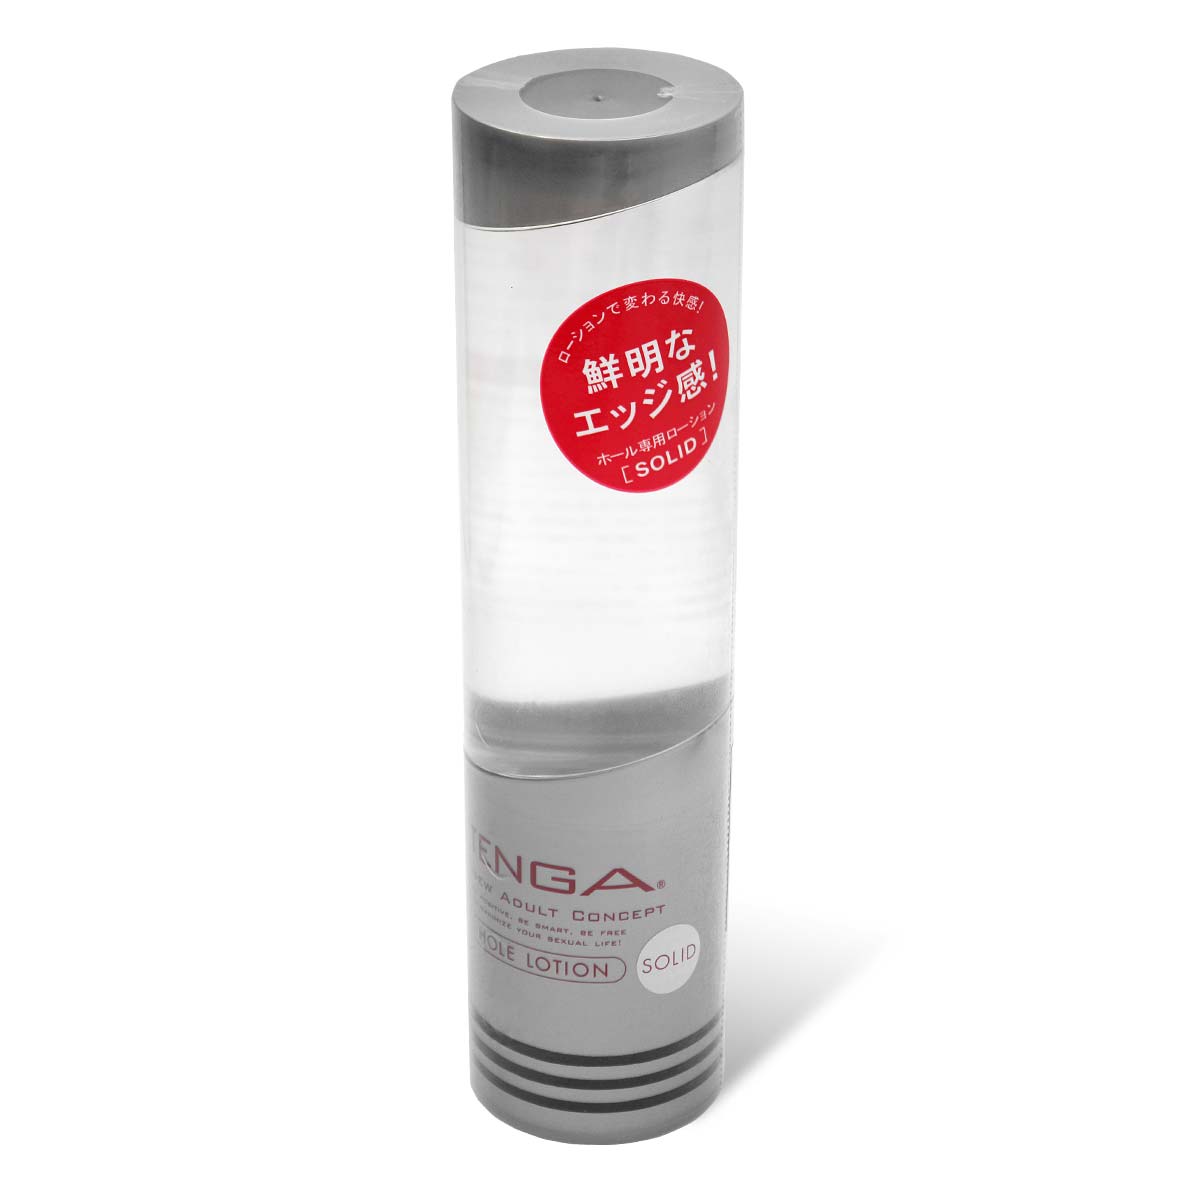 TENGA HOLE LOTION SOLID 170ml Water-based Lubricant-p_1